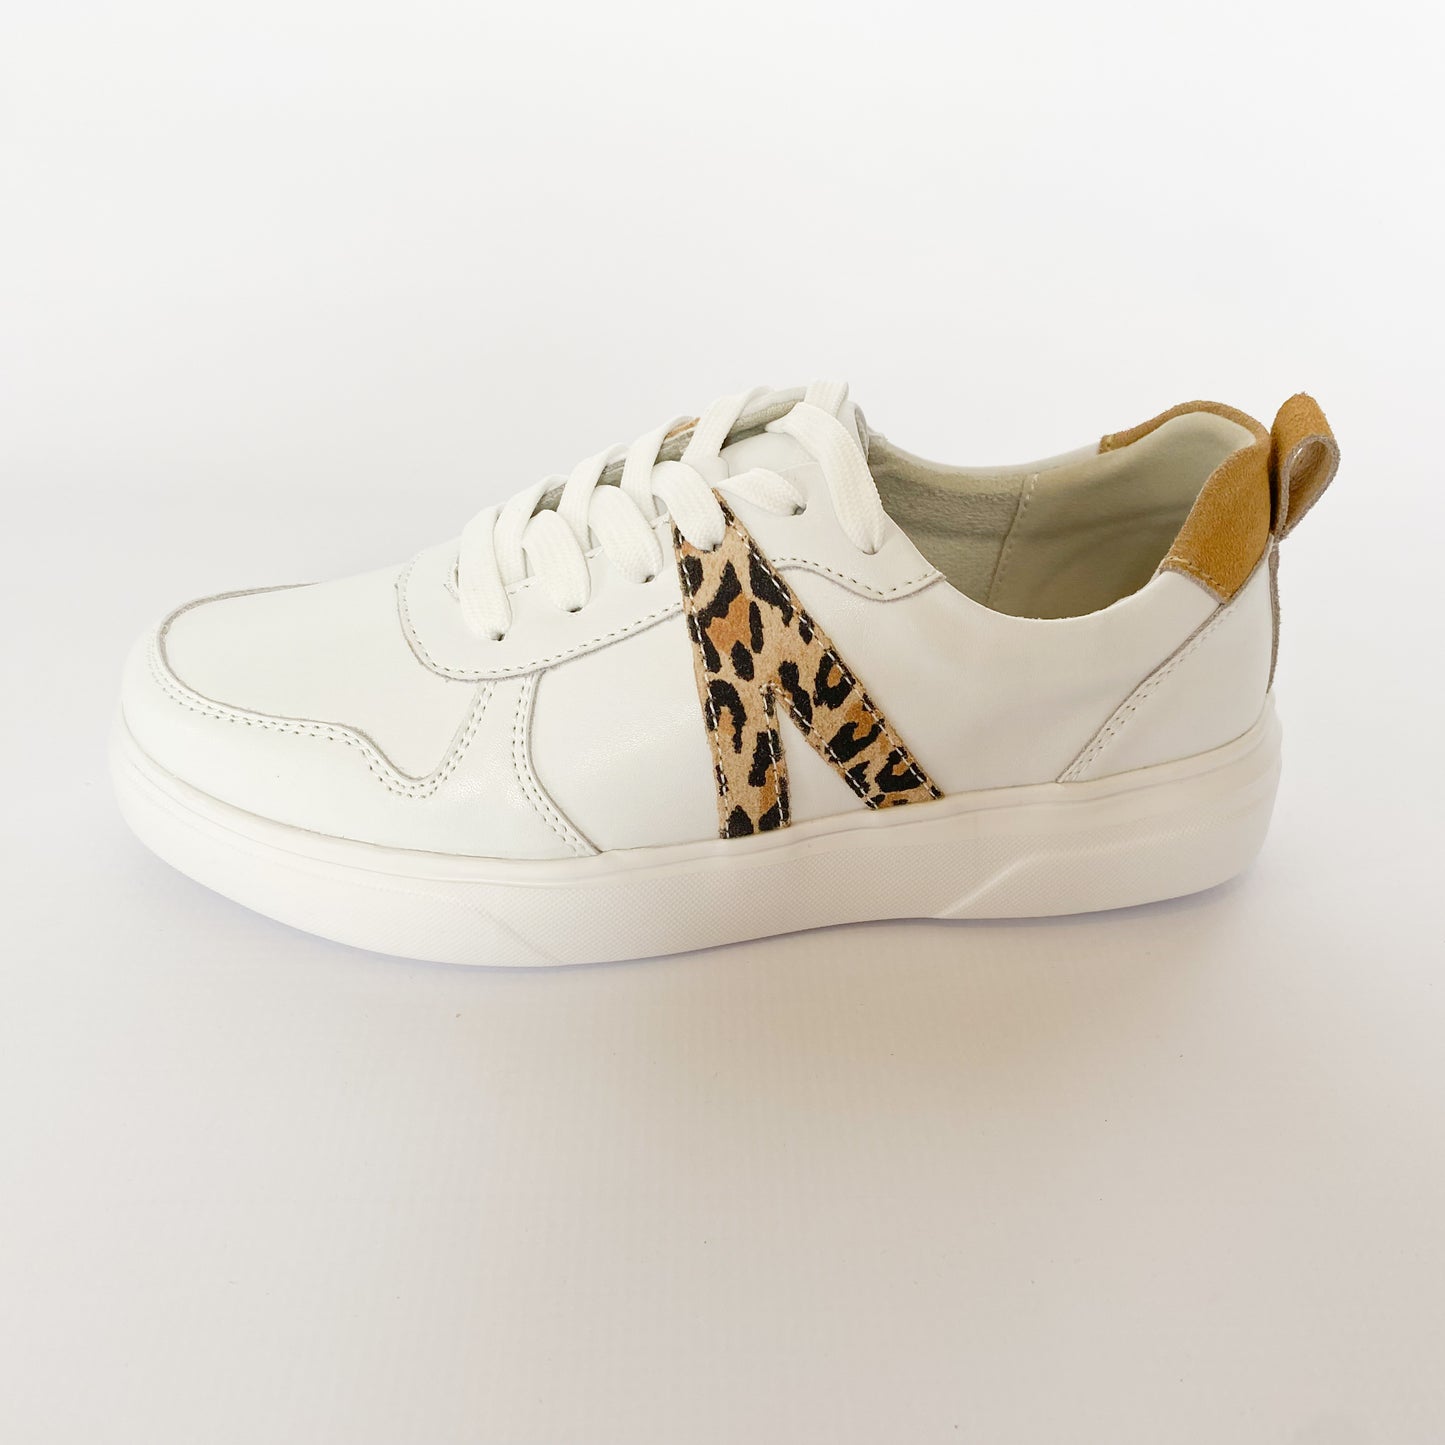 Gia white and leopard print leather sneaker